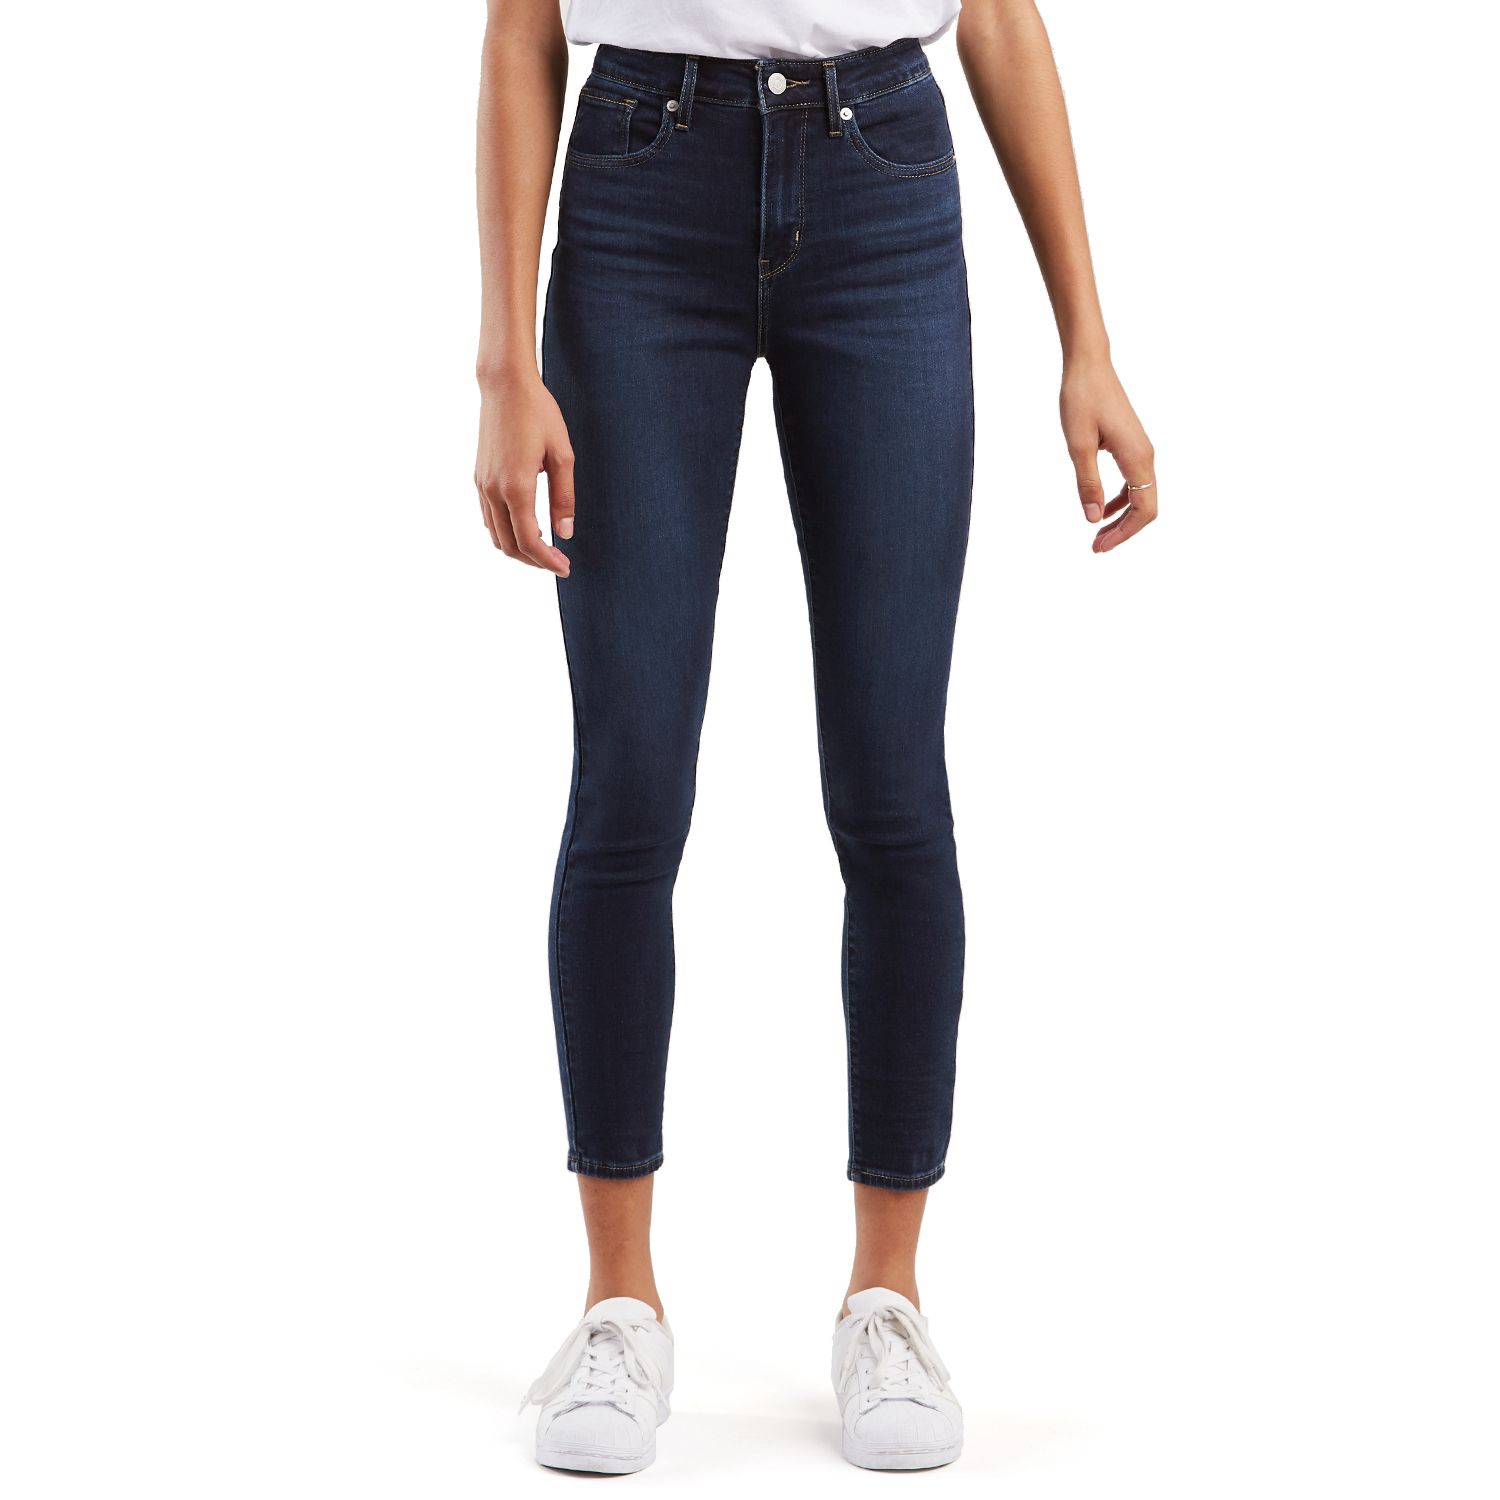 721 high rise skinny jeans sale